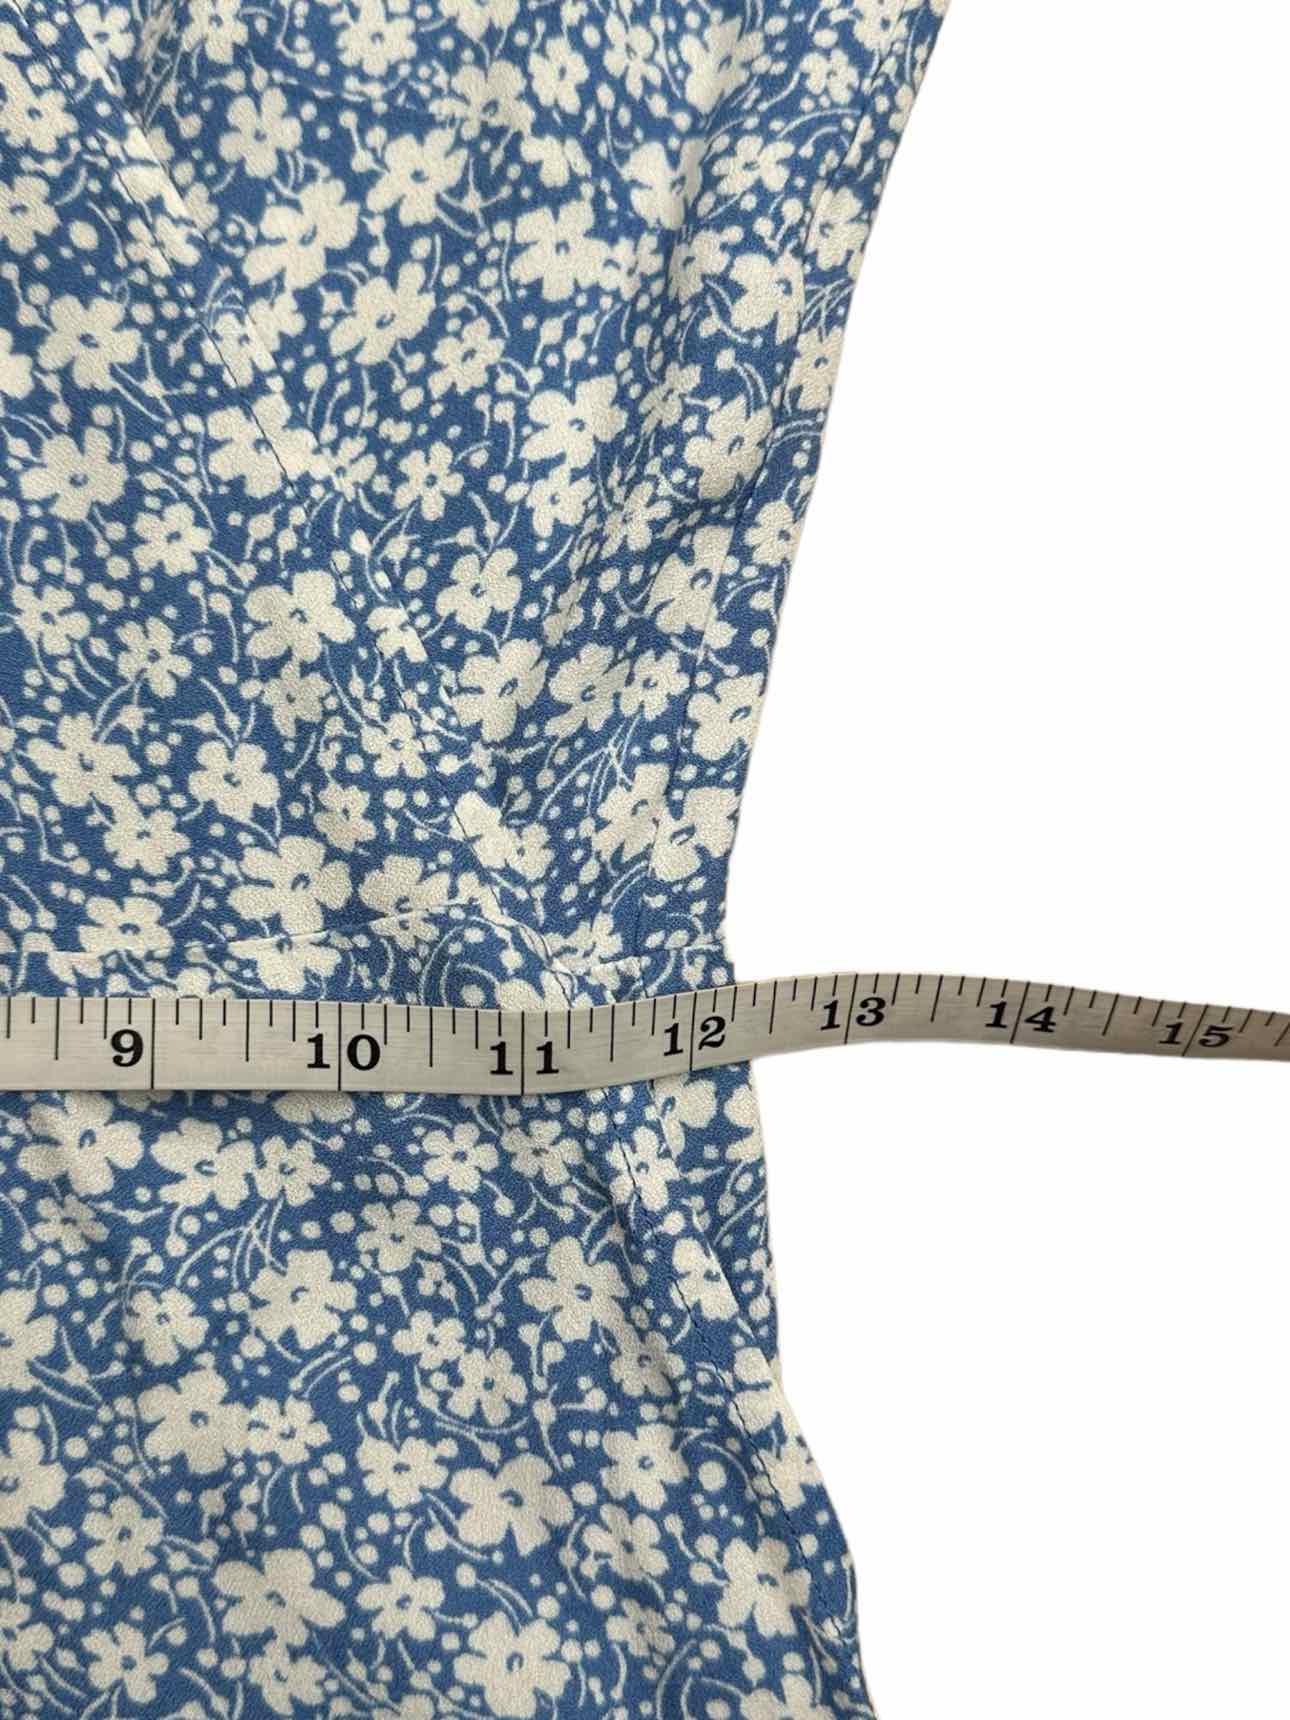 Reformation Blue Ditsy Floral Wrap Dress Size S